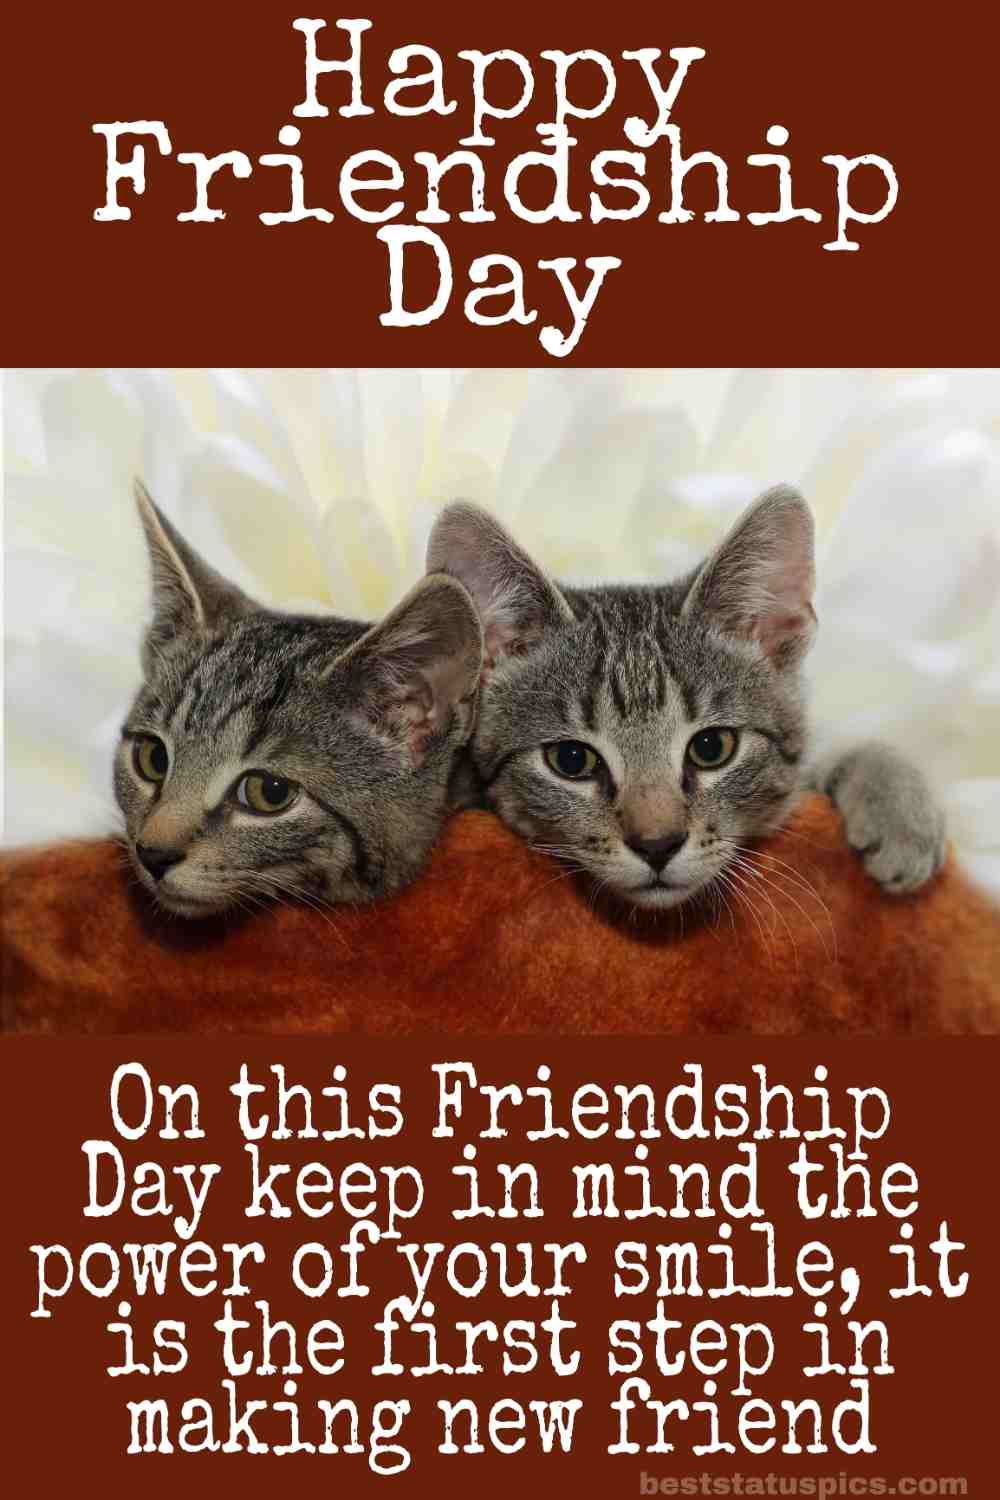 Cute happy Friendship Day 2022 wishes, gift card, images and greeting cards for girls and boys